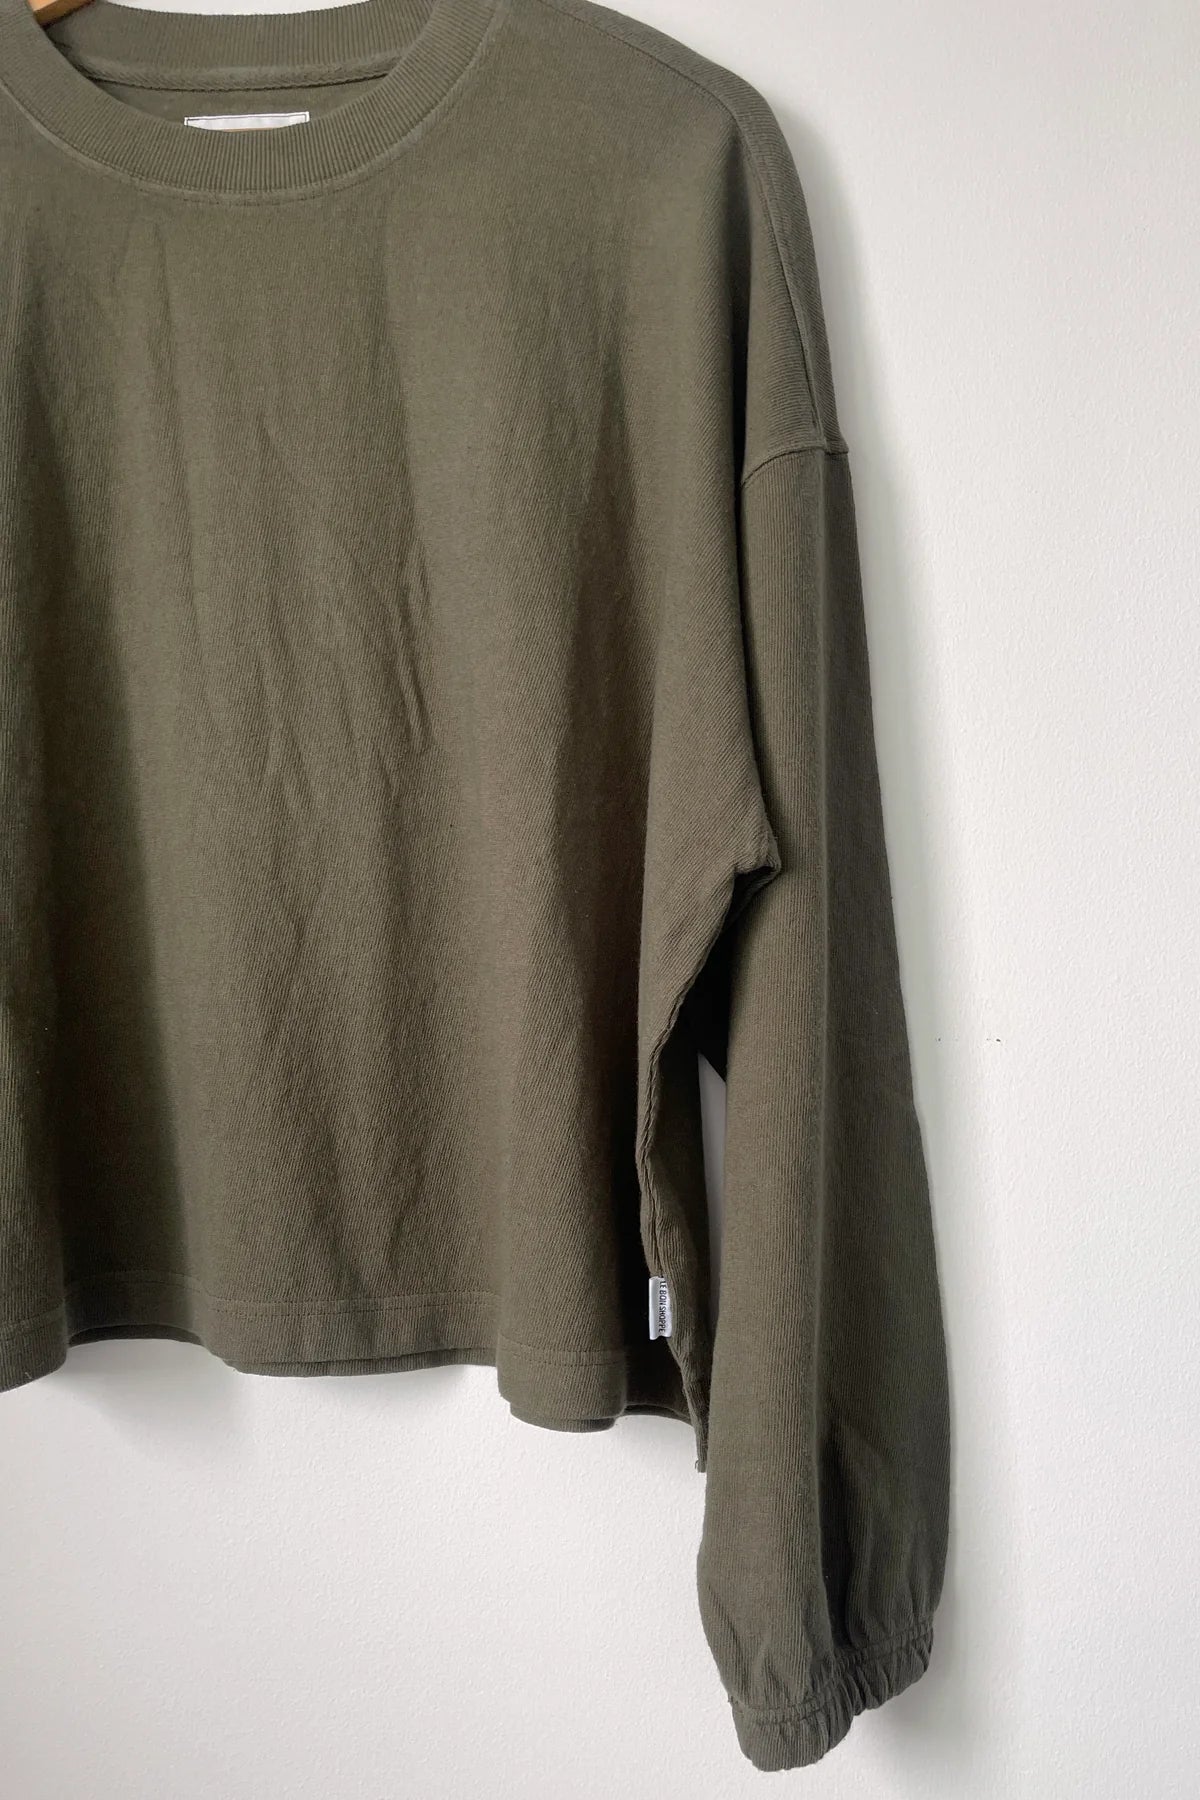 Naturelle Tee In Olive